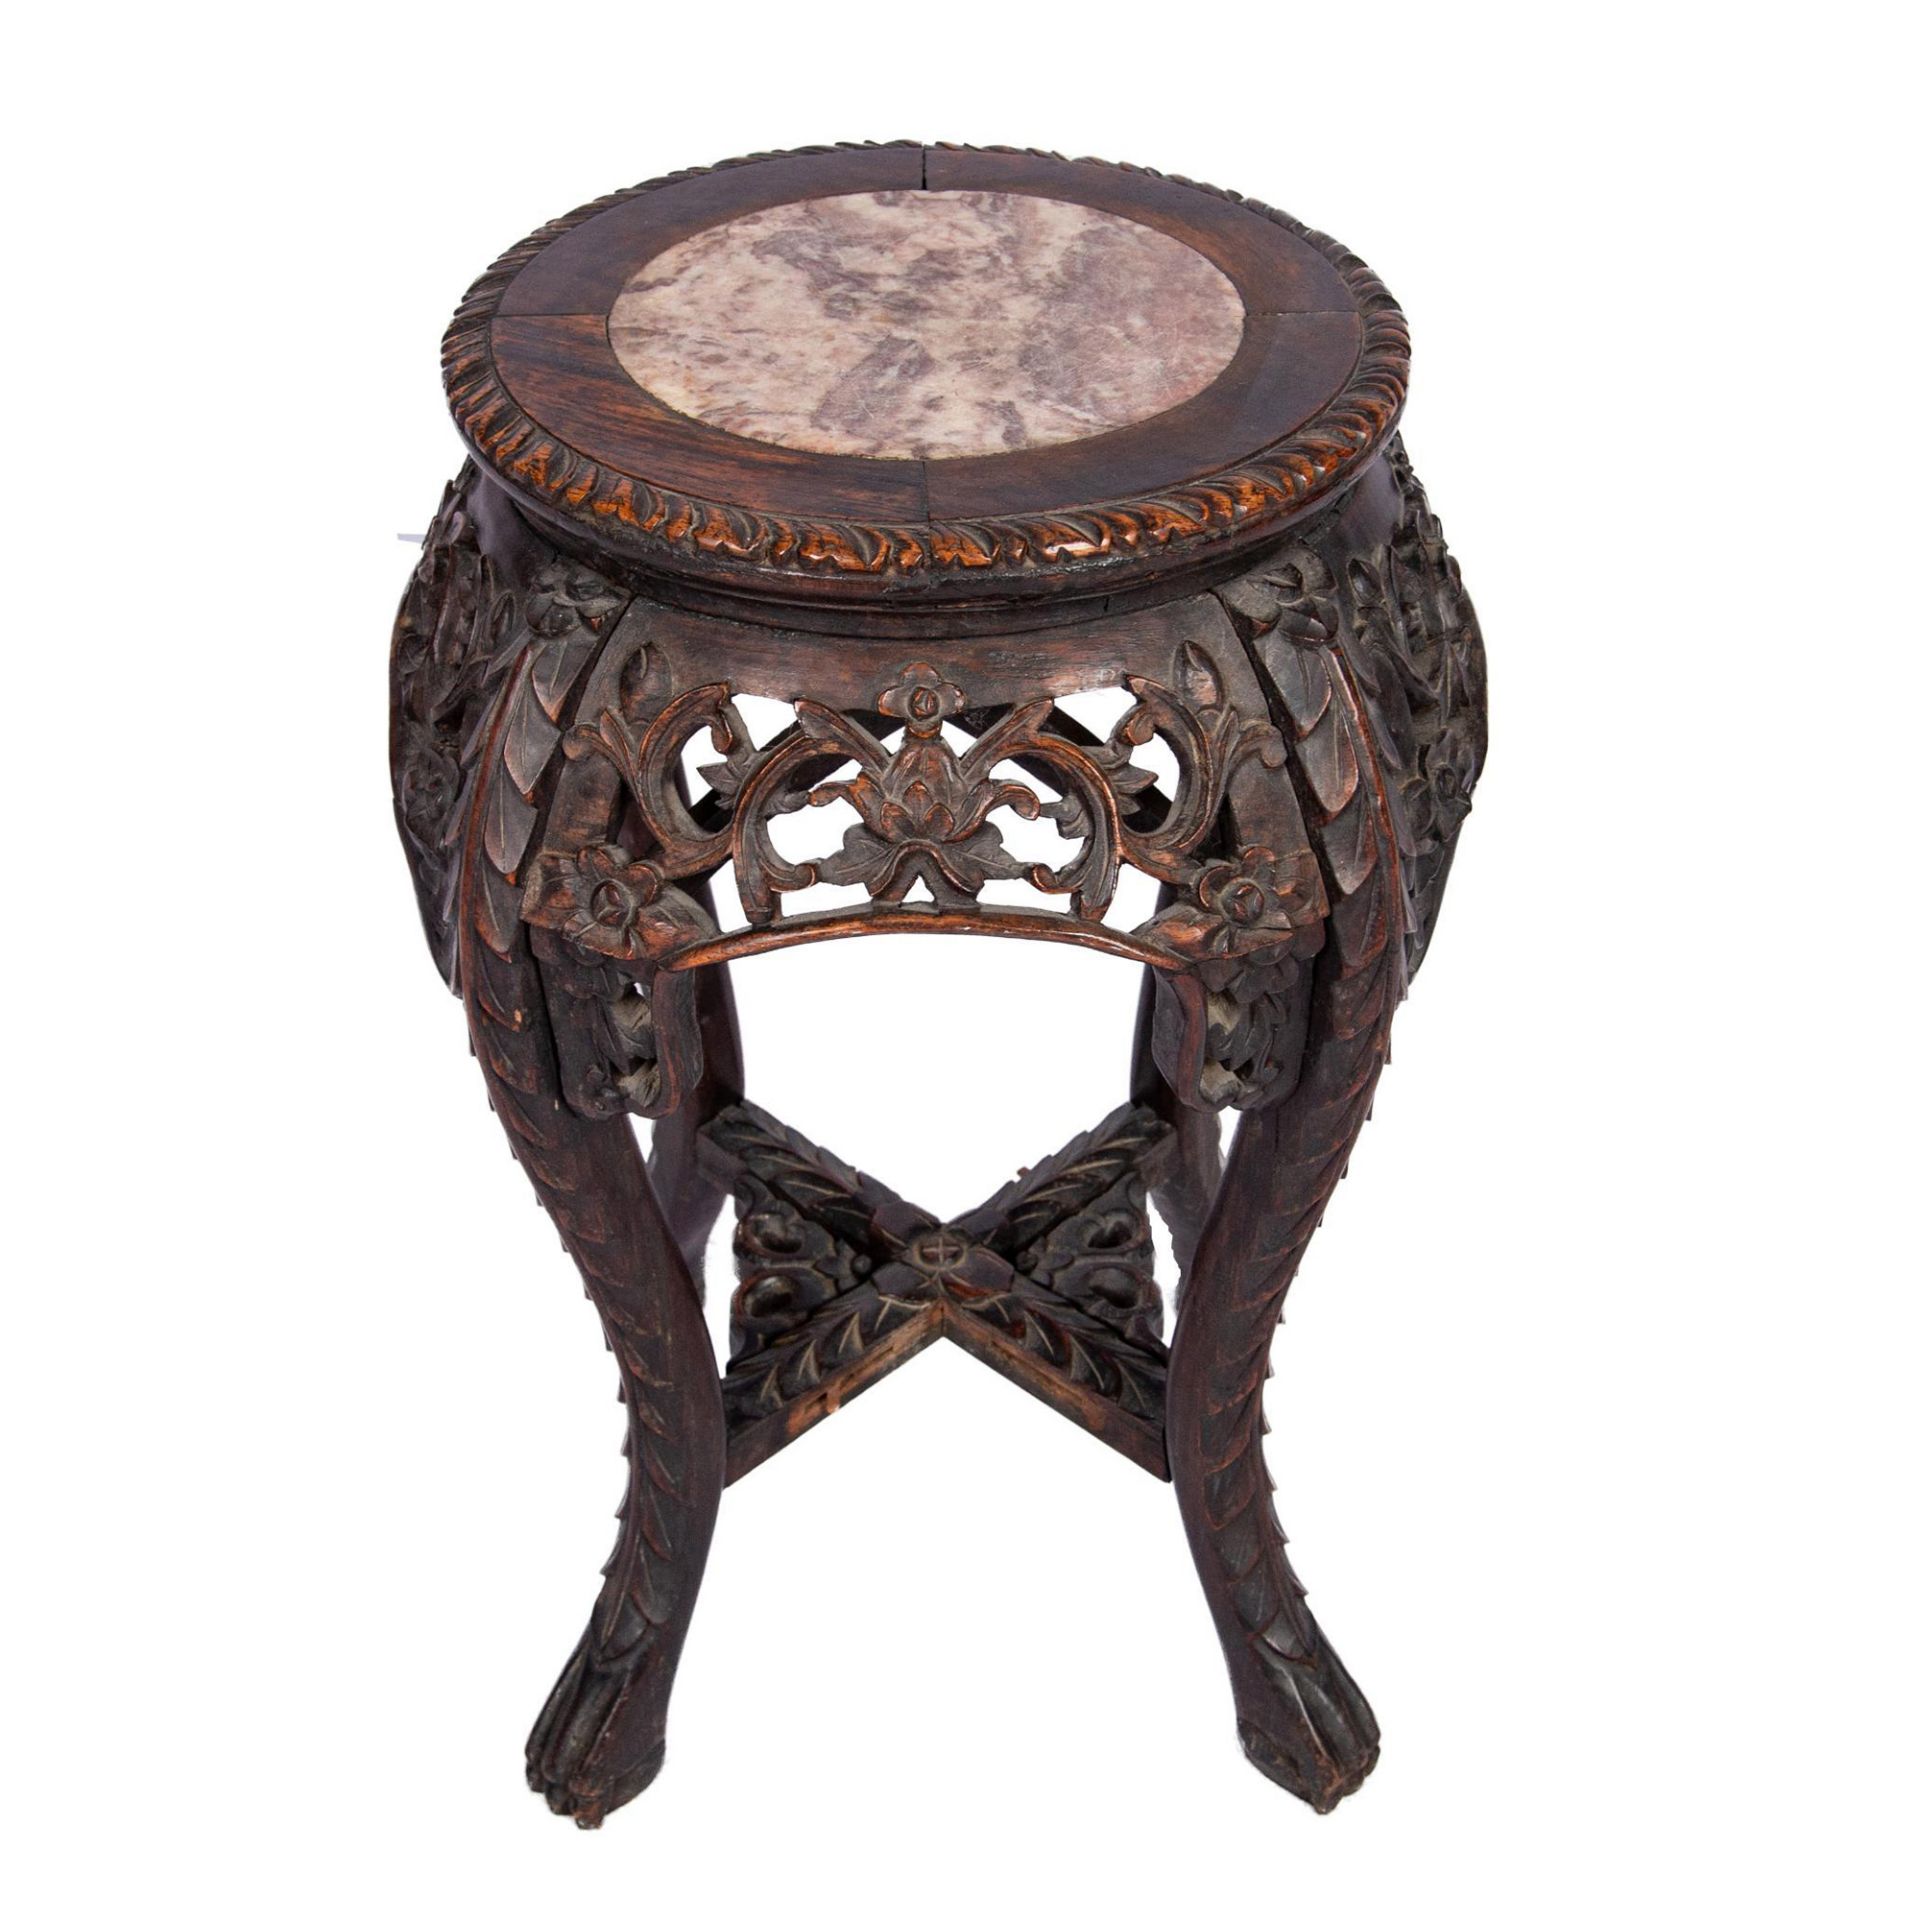 Antique Chinese Jardiniere Stand in Ebonized Wood with Marble Top - Image 2 of 5